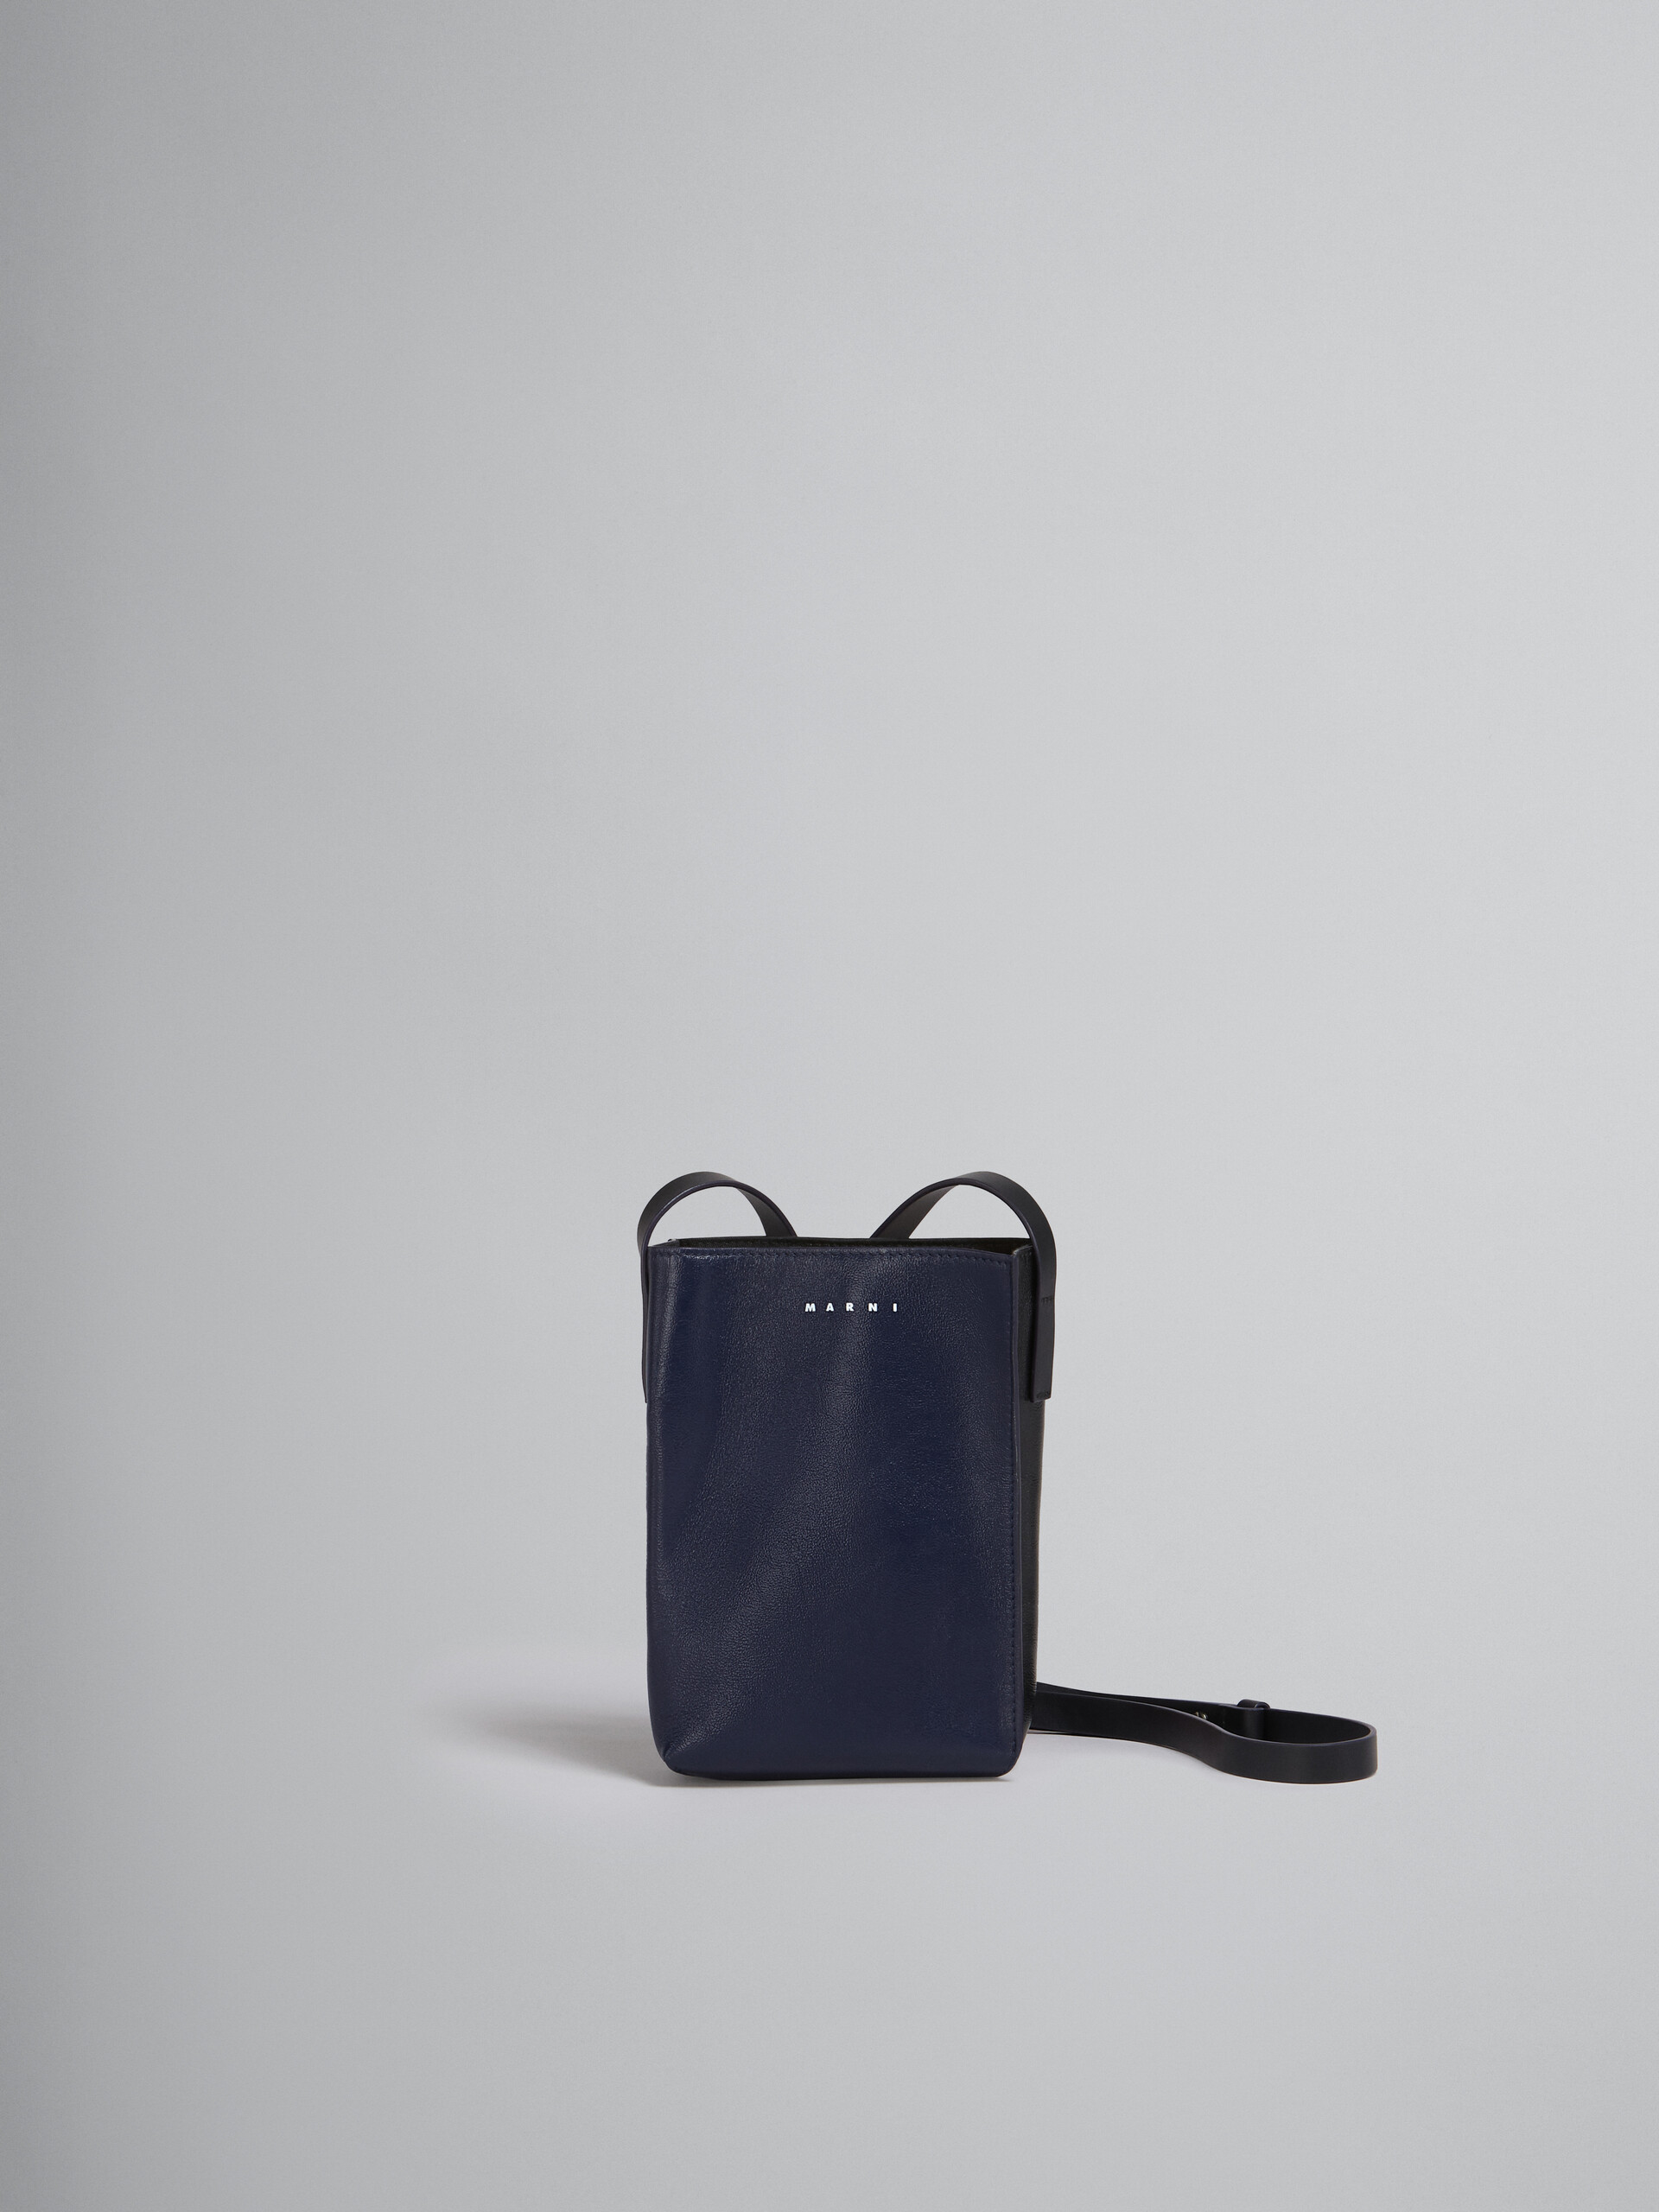 MUSEO SOFT small bag in blue and black shiny leather - Shoulder Bags - Image 1